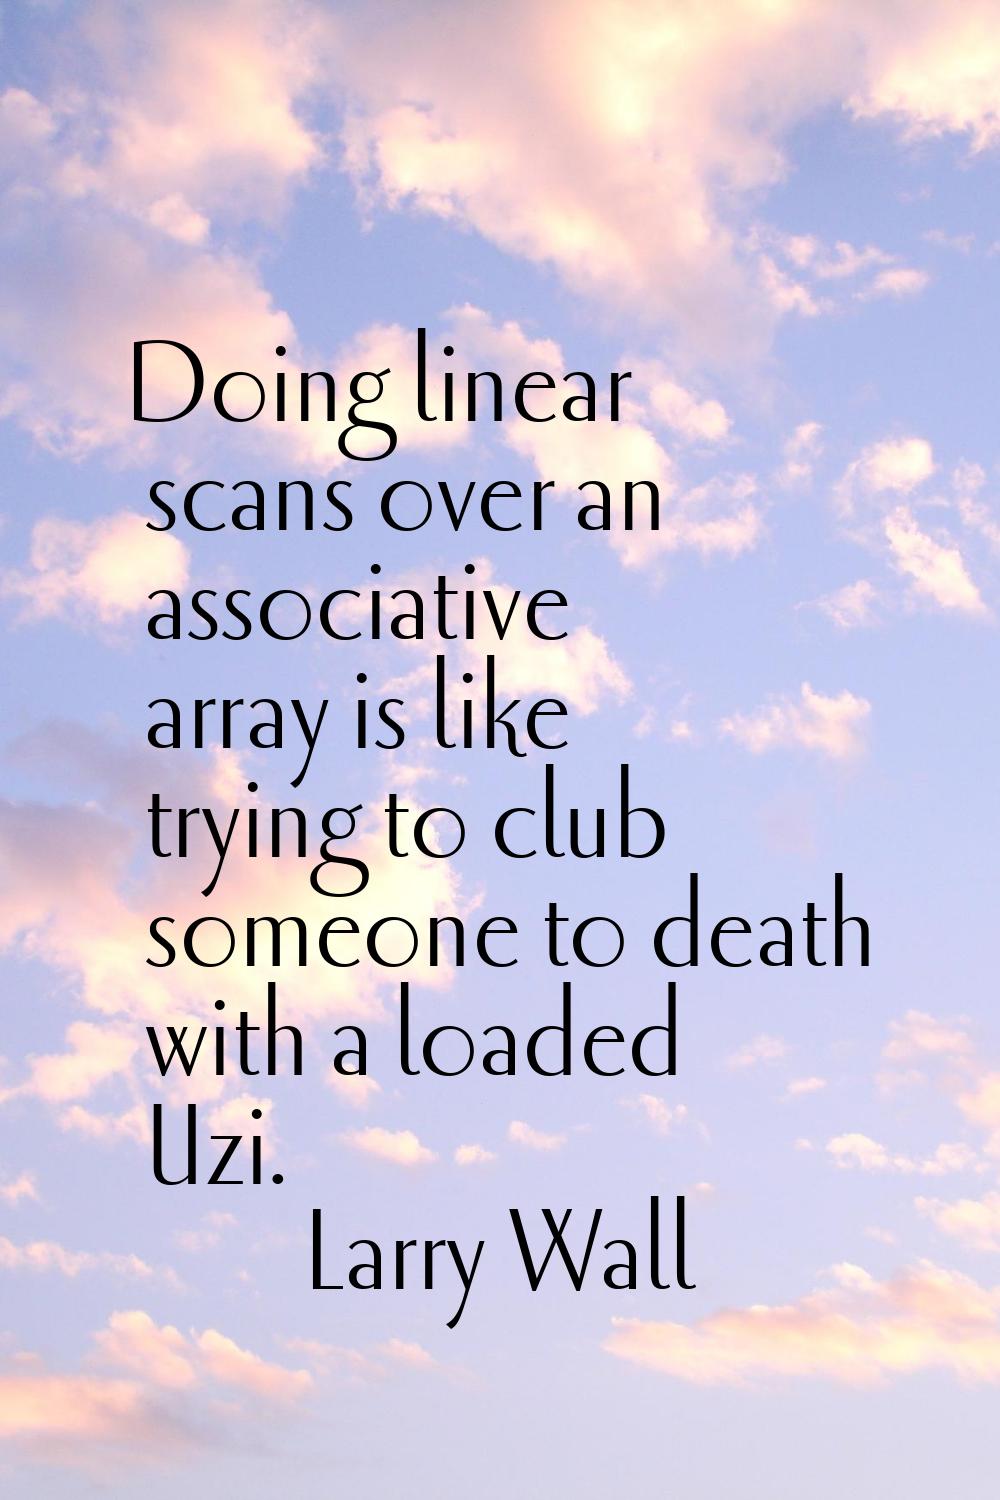 Doing linear scans over an associative array is like trying to club someone to death with a loaded 